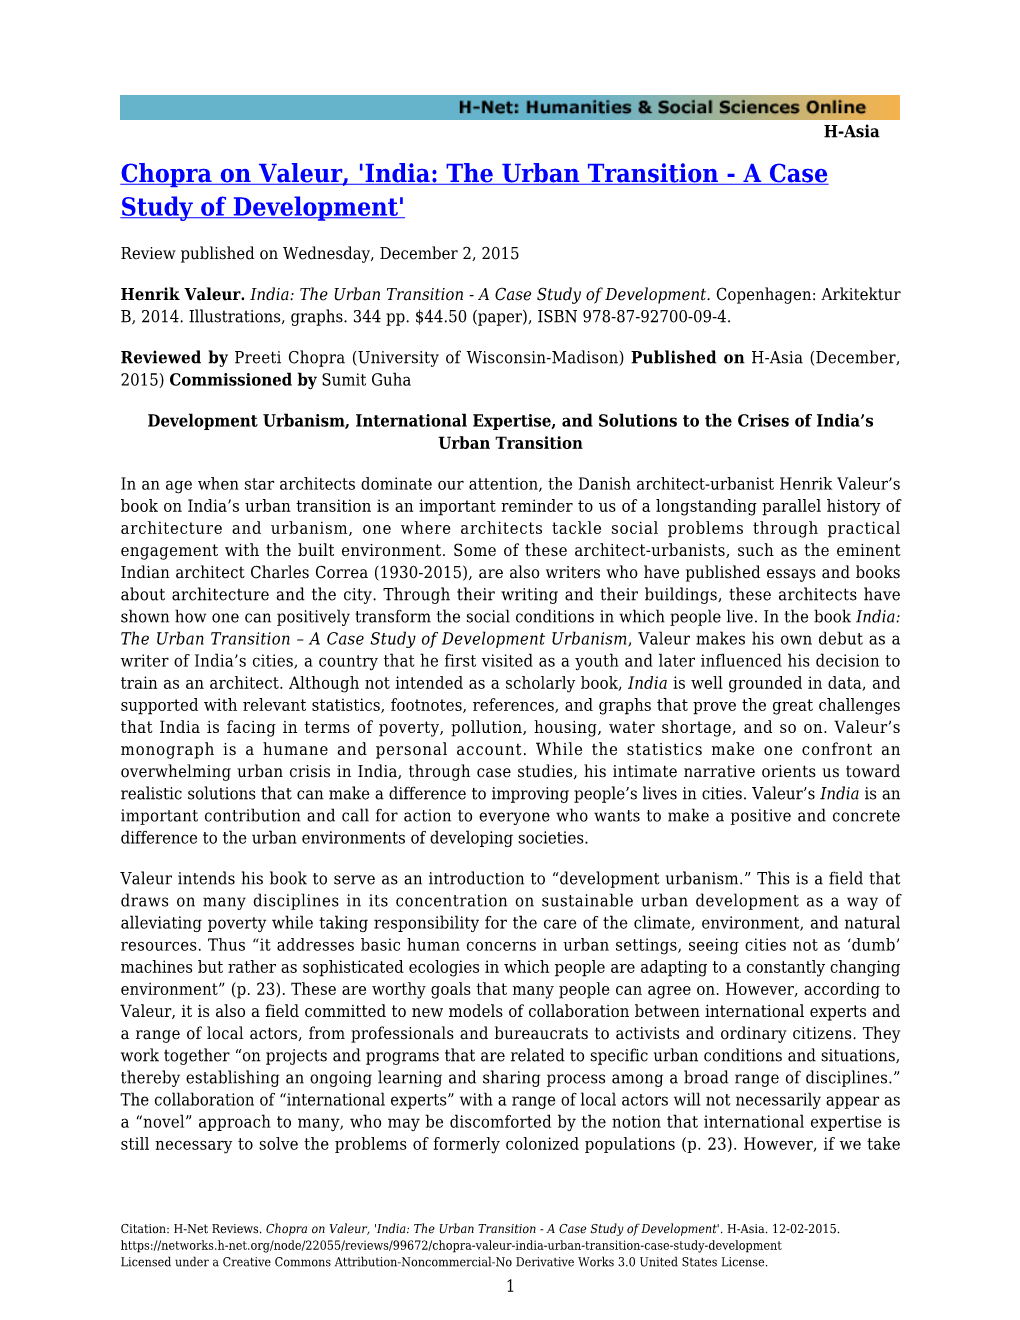 India: the Urban Transition - a Case Study of Development'